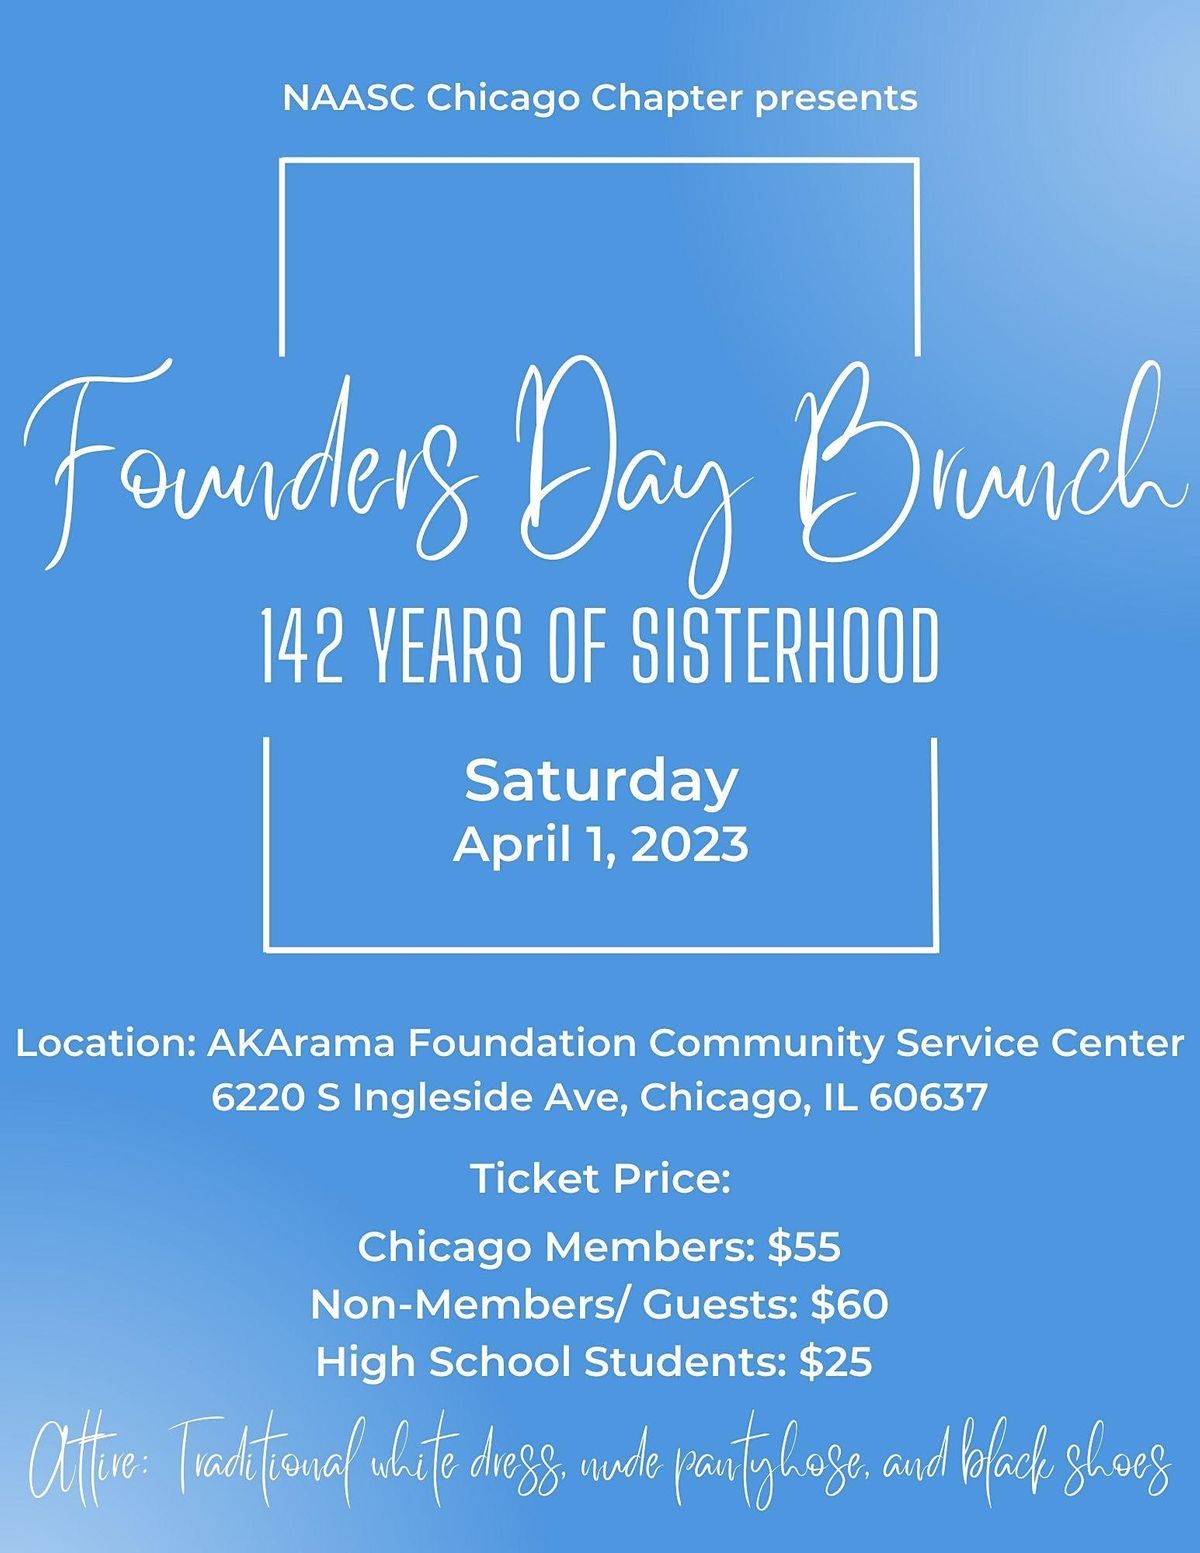 The Chicago Chapter of the NAASC - 142nd Founders Day Celebration